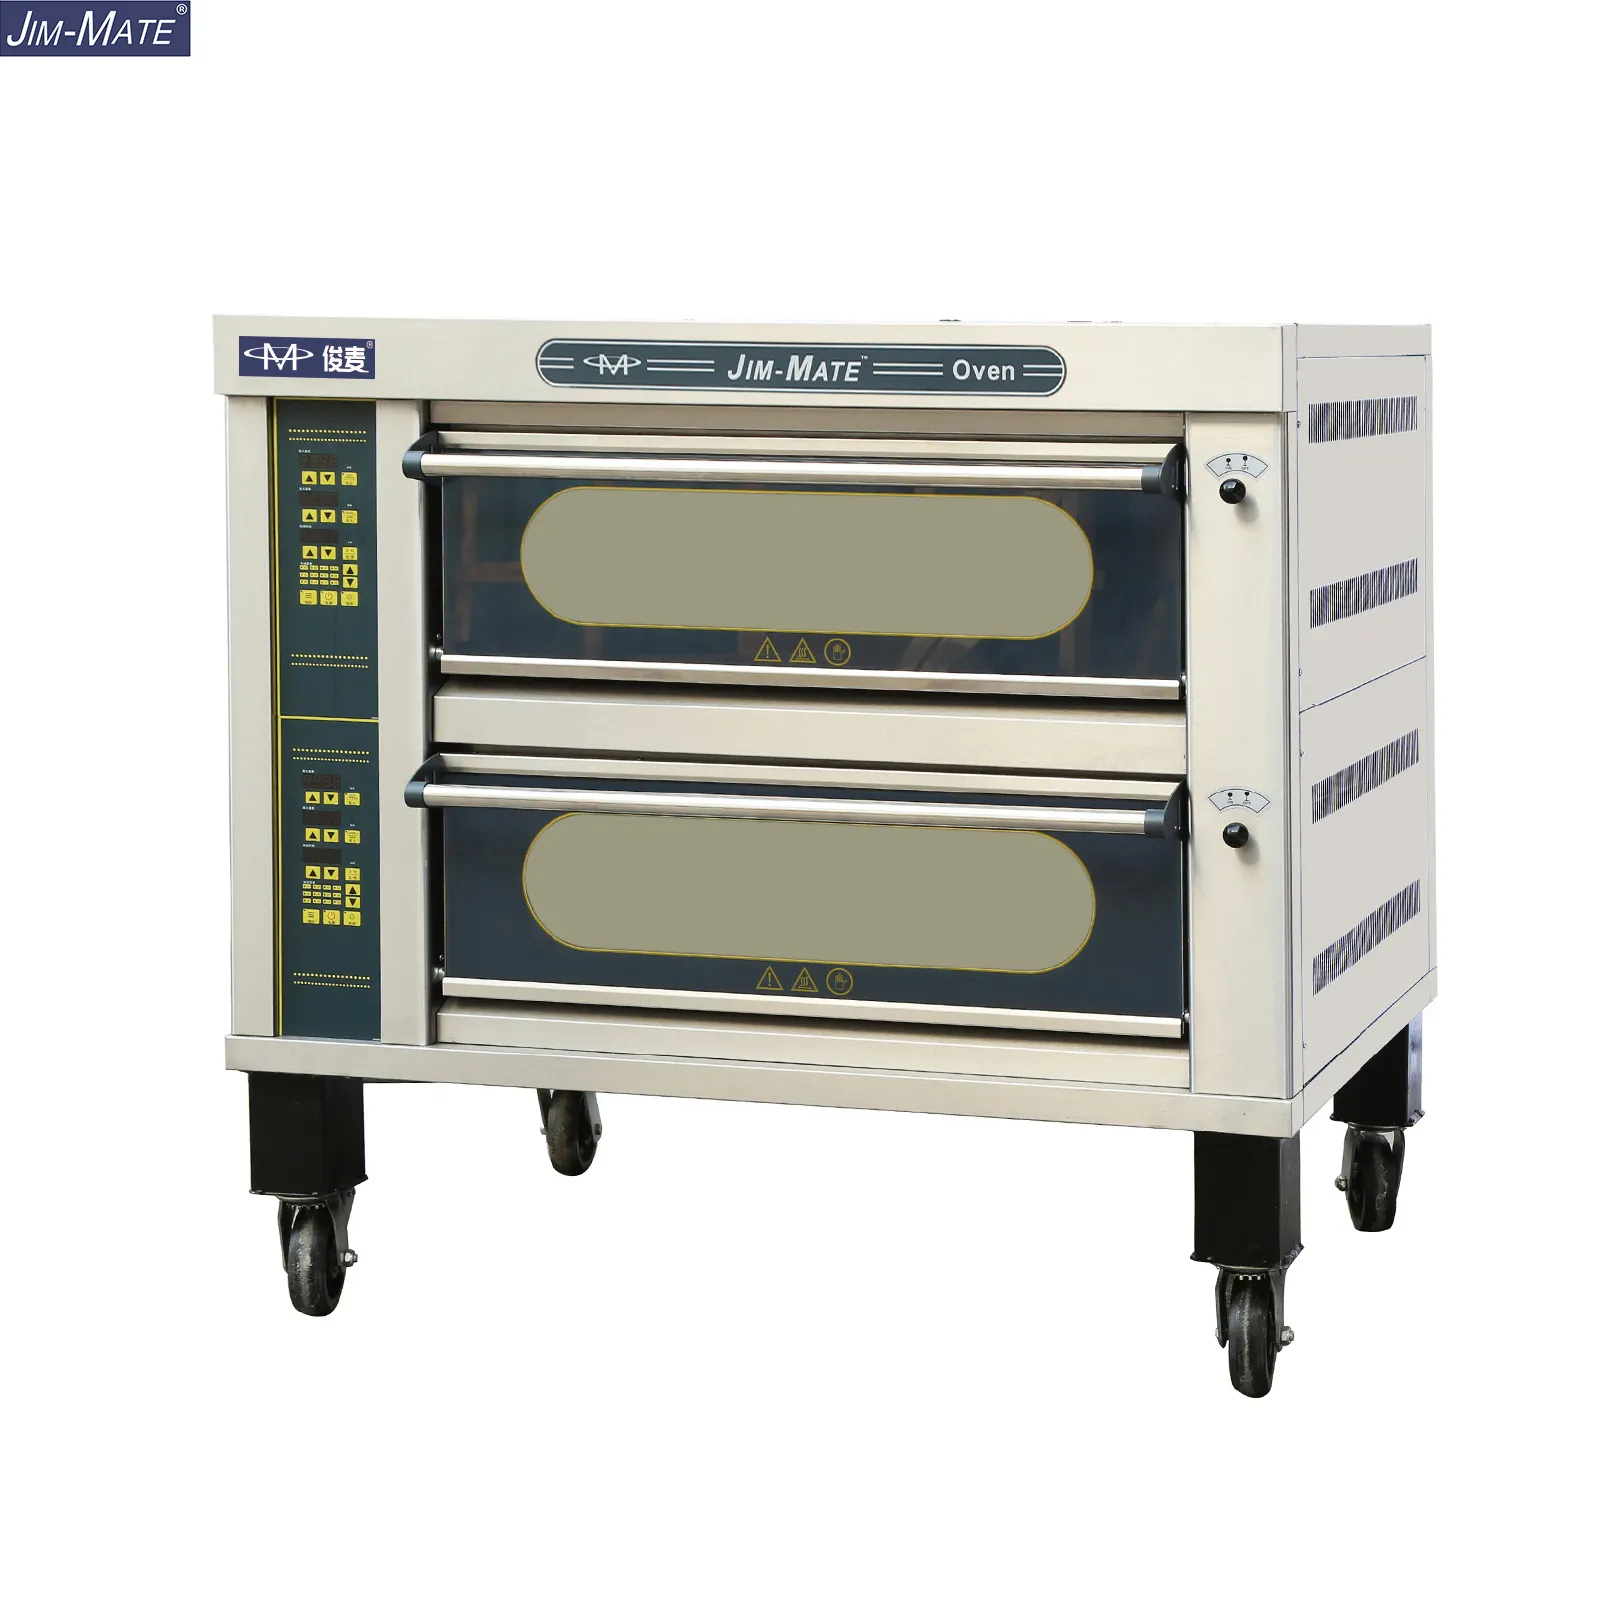 Bakery Kitchen Catering Equipment Industrial Commercial Electric Making Machine 2 deck 4 treys cake bread pizza Baking Oven Deck